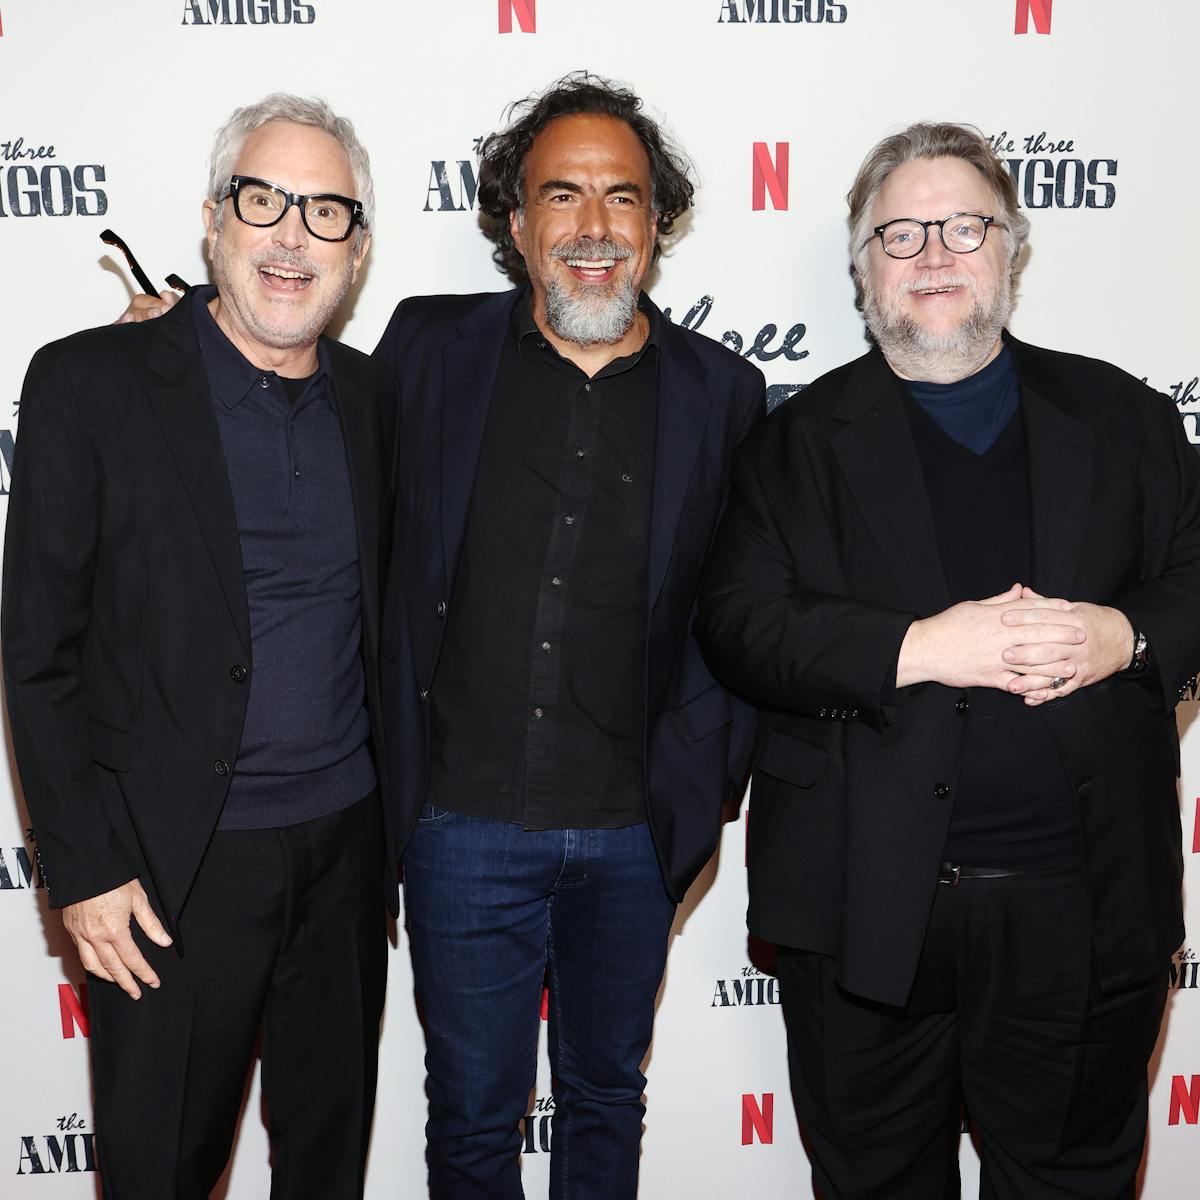 Alfonso Cuarón, Alejandro Iñárritu, and Guillermo del Toro stand together on a red carpet. The step-and-repeat background features the Netflix icon, and 'the three Amigos' in faded black.